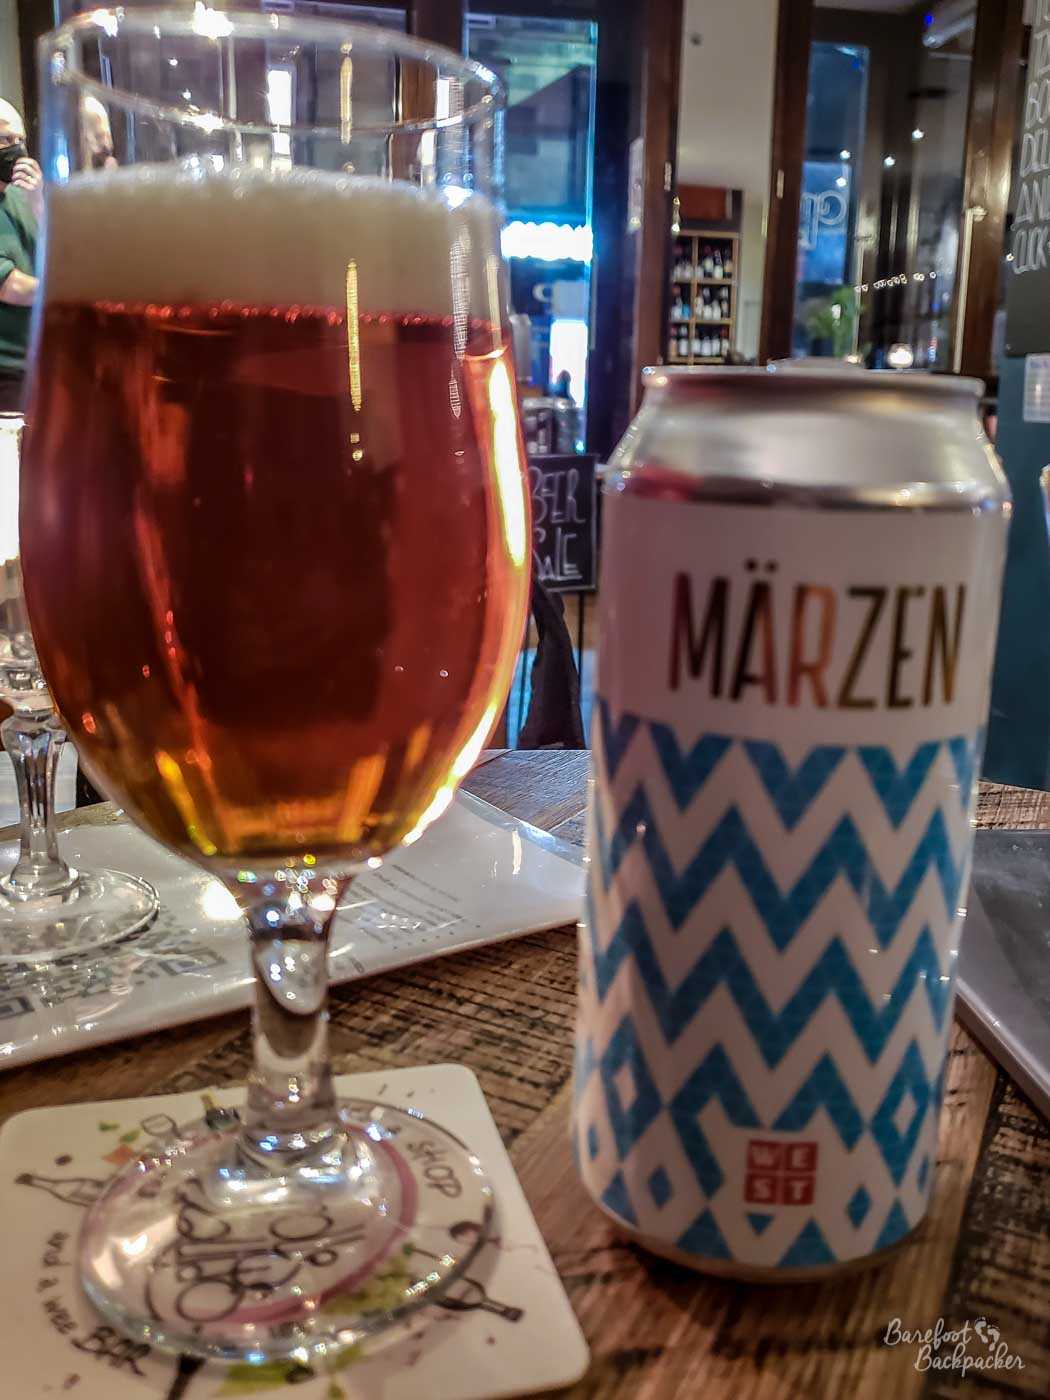 A can of beer stands on a table. To the left of it is a glass with the beer in. The beer is 'Marzen', from West Brewery. The can is decorated in a zig-zag pattern.